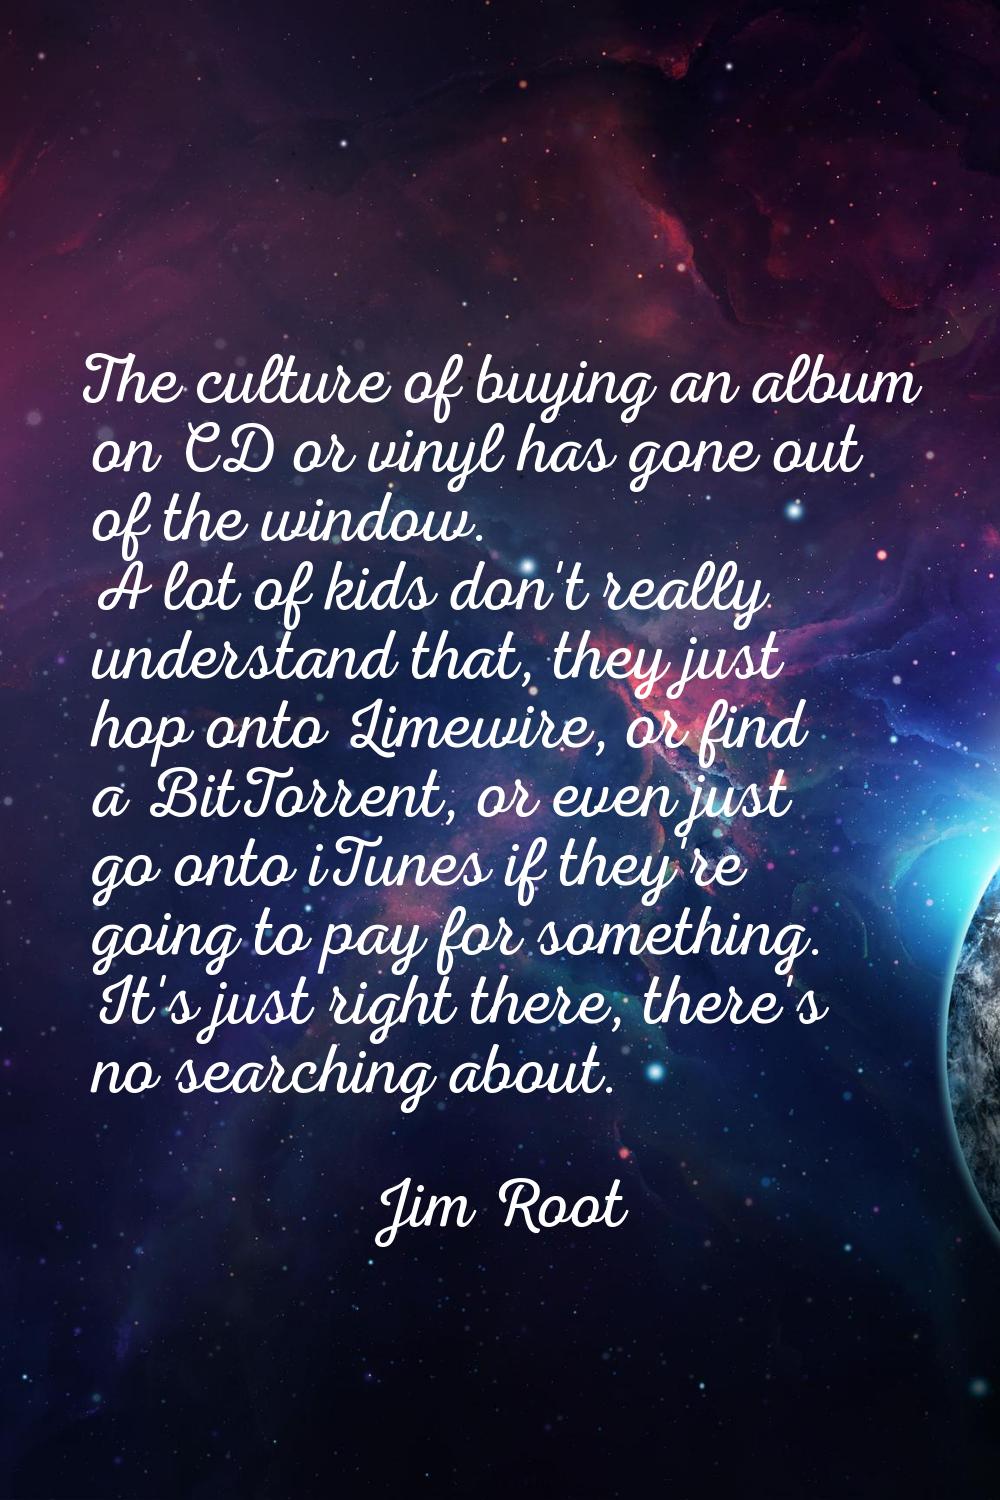 The culture of buying an album on CD or vinyl has gone out of the window. A lot of kids don't reall